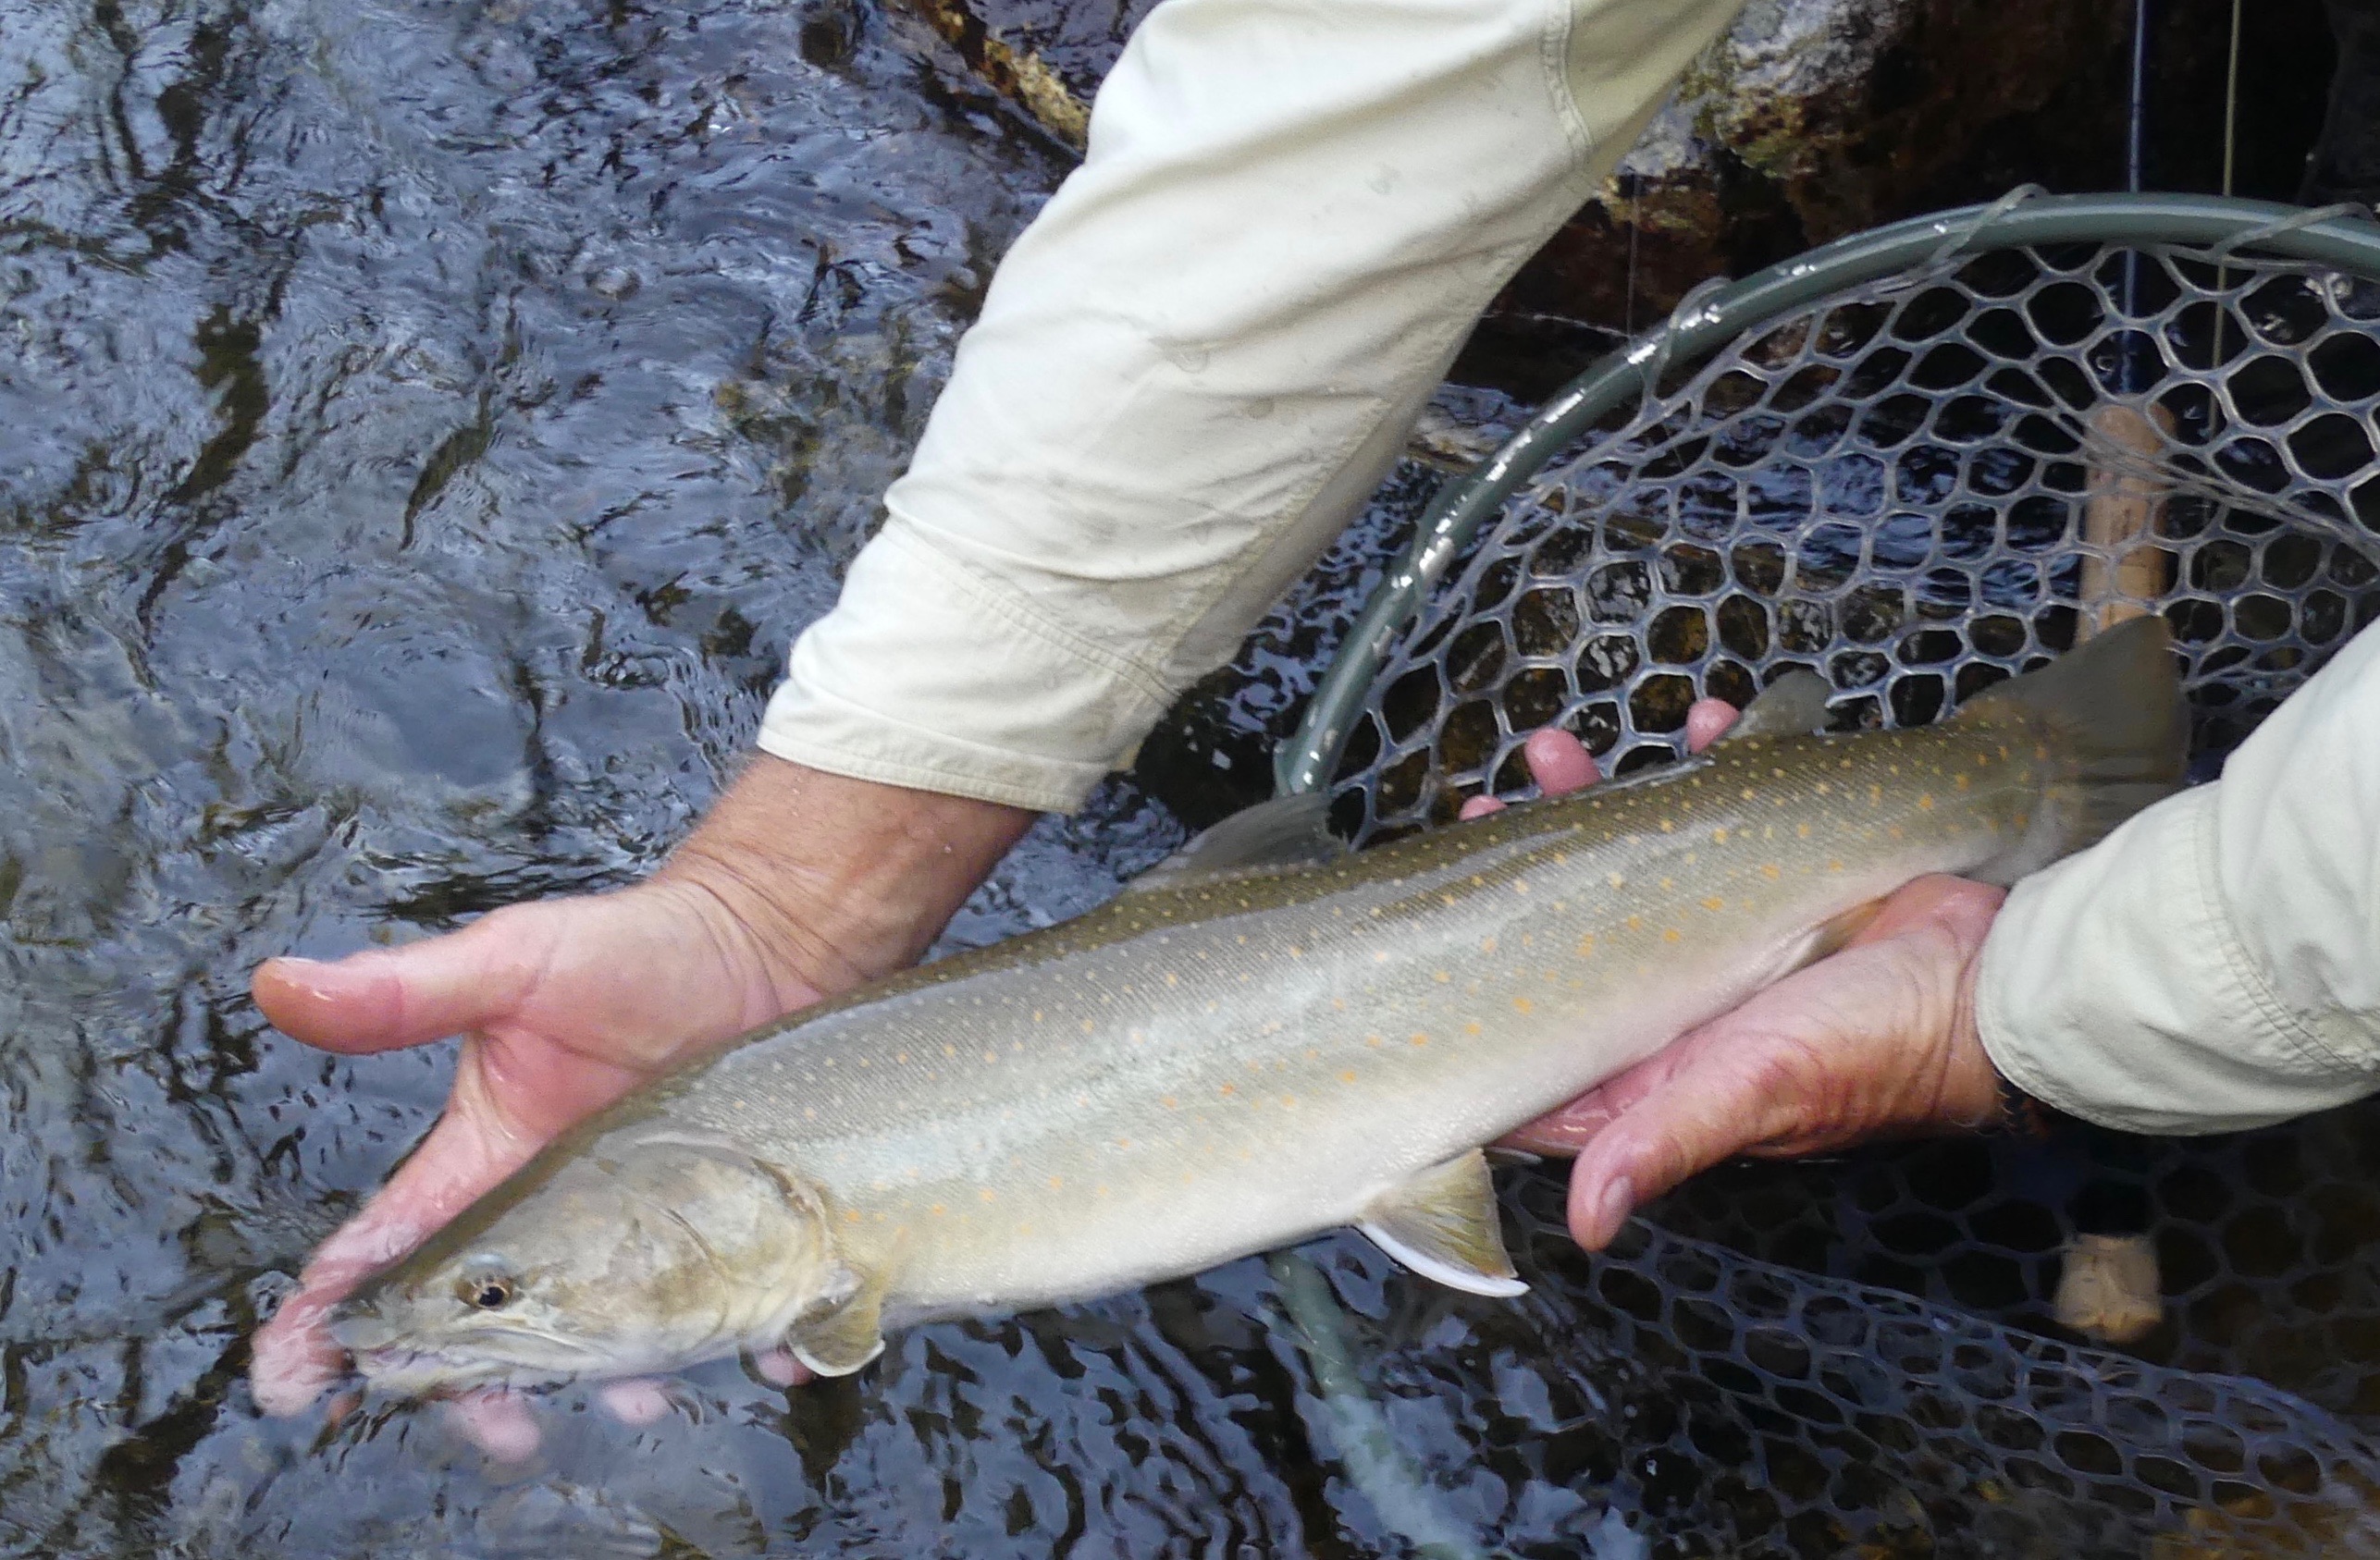 Fly Fishing for Bull Trout